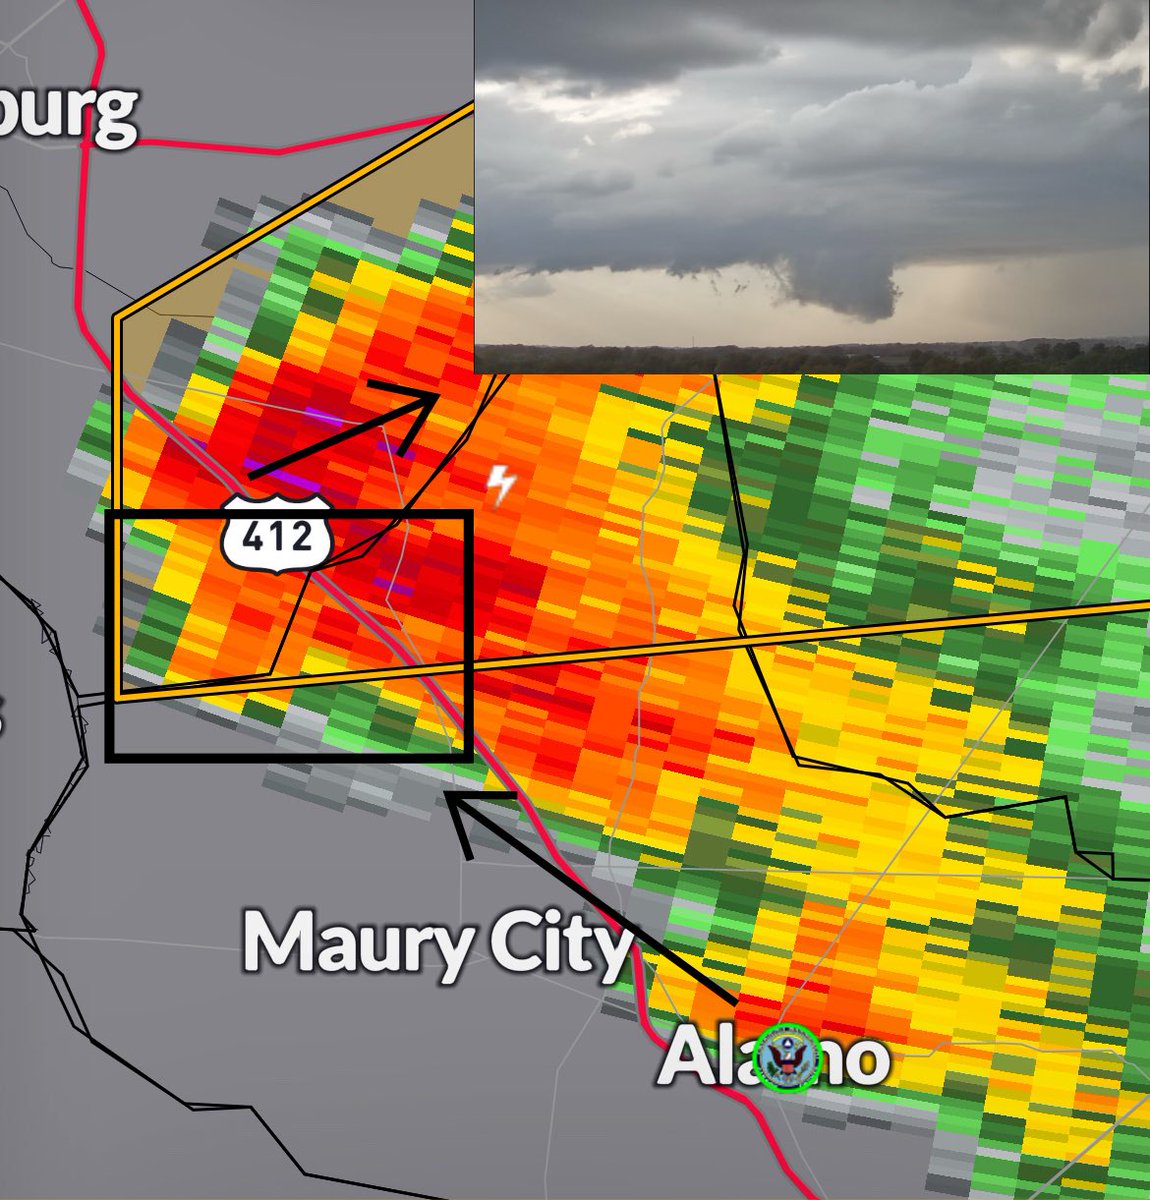 Interesting looking storm near Maury City, TN this has a severe thunderstorm warning with main hazard being that damaging hail! Stay safe out there if you are in the warning…

#tornado #severewx #wxtwitter #TNwx